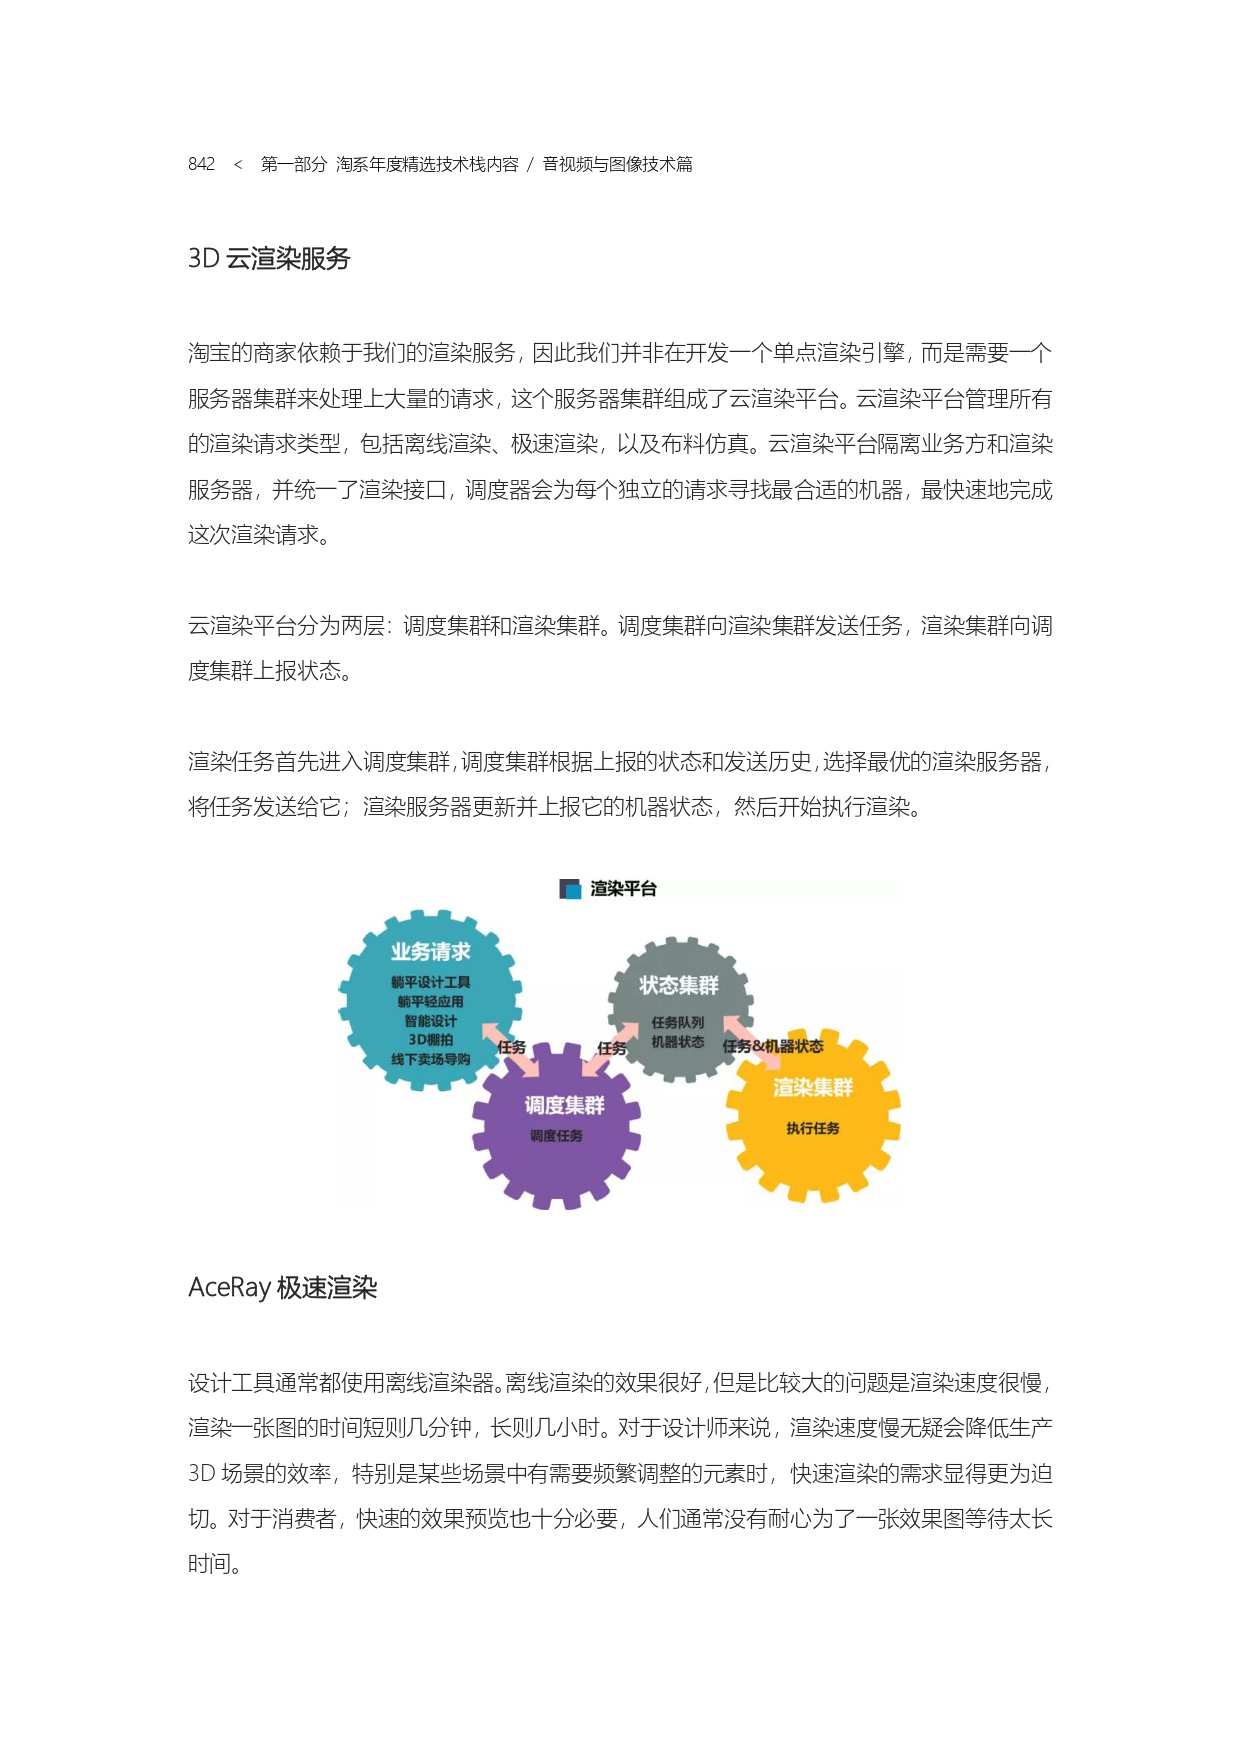 The Complete Works of Tao Technology 2020-571-1189-1-300_page-0272.jpg